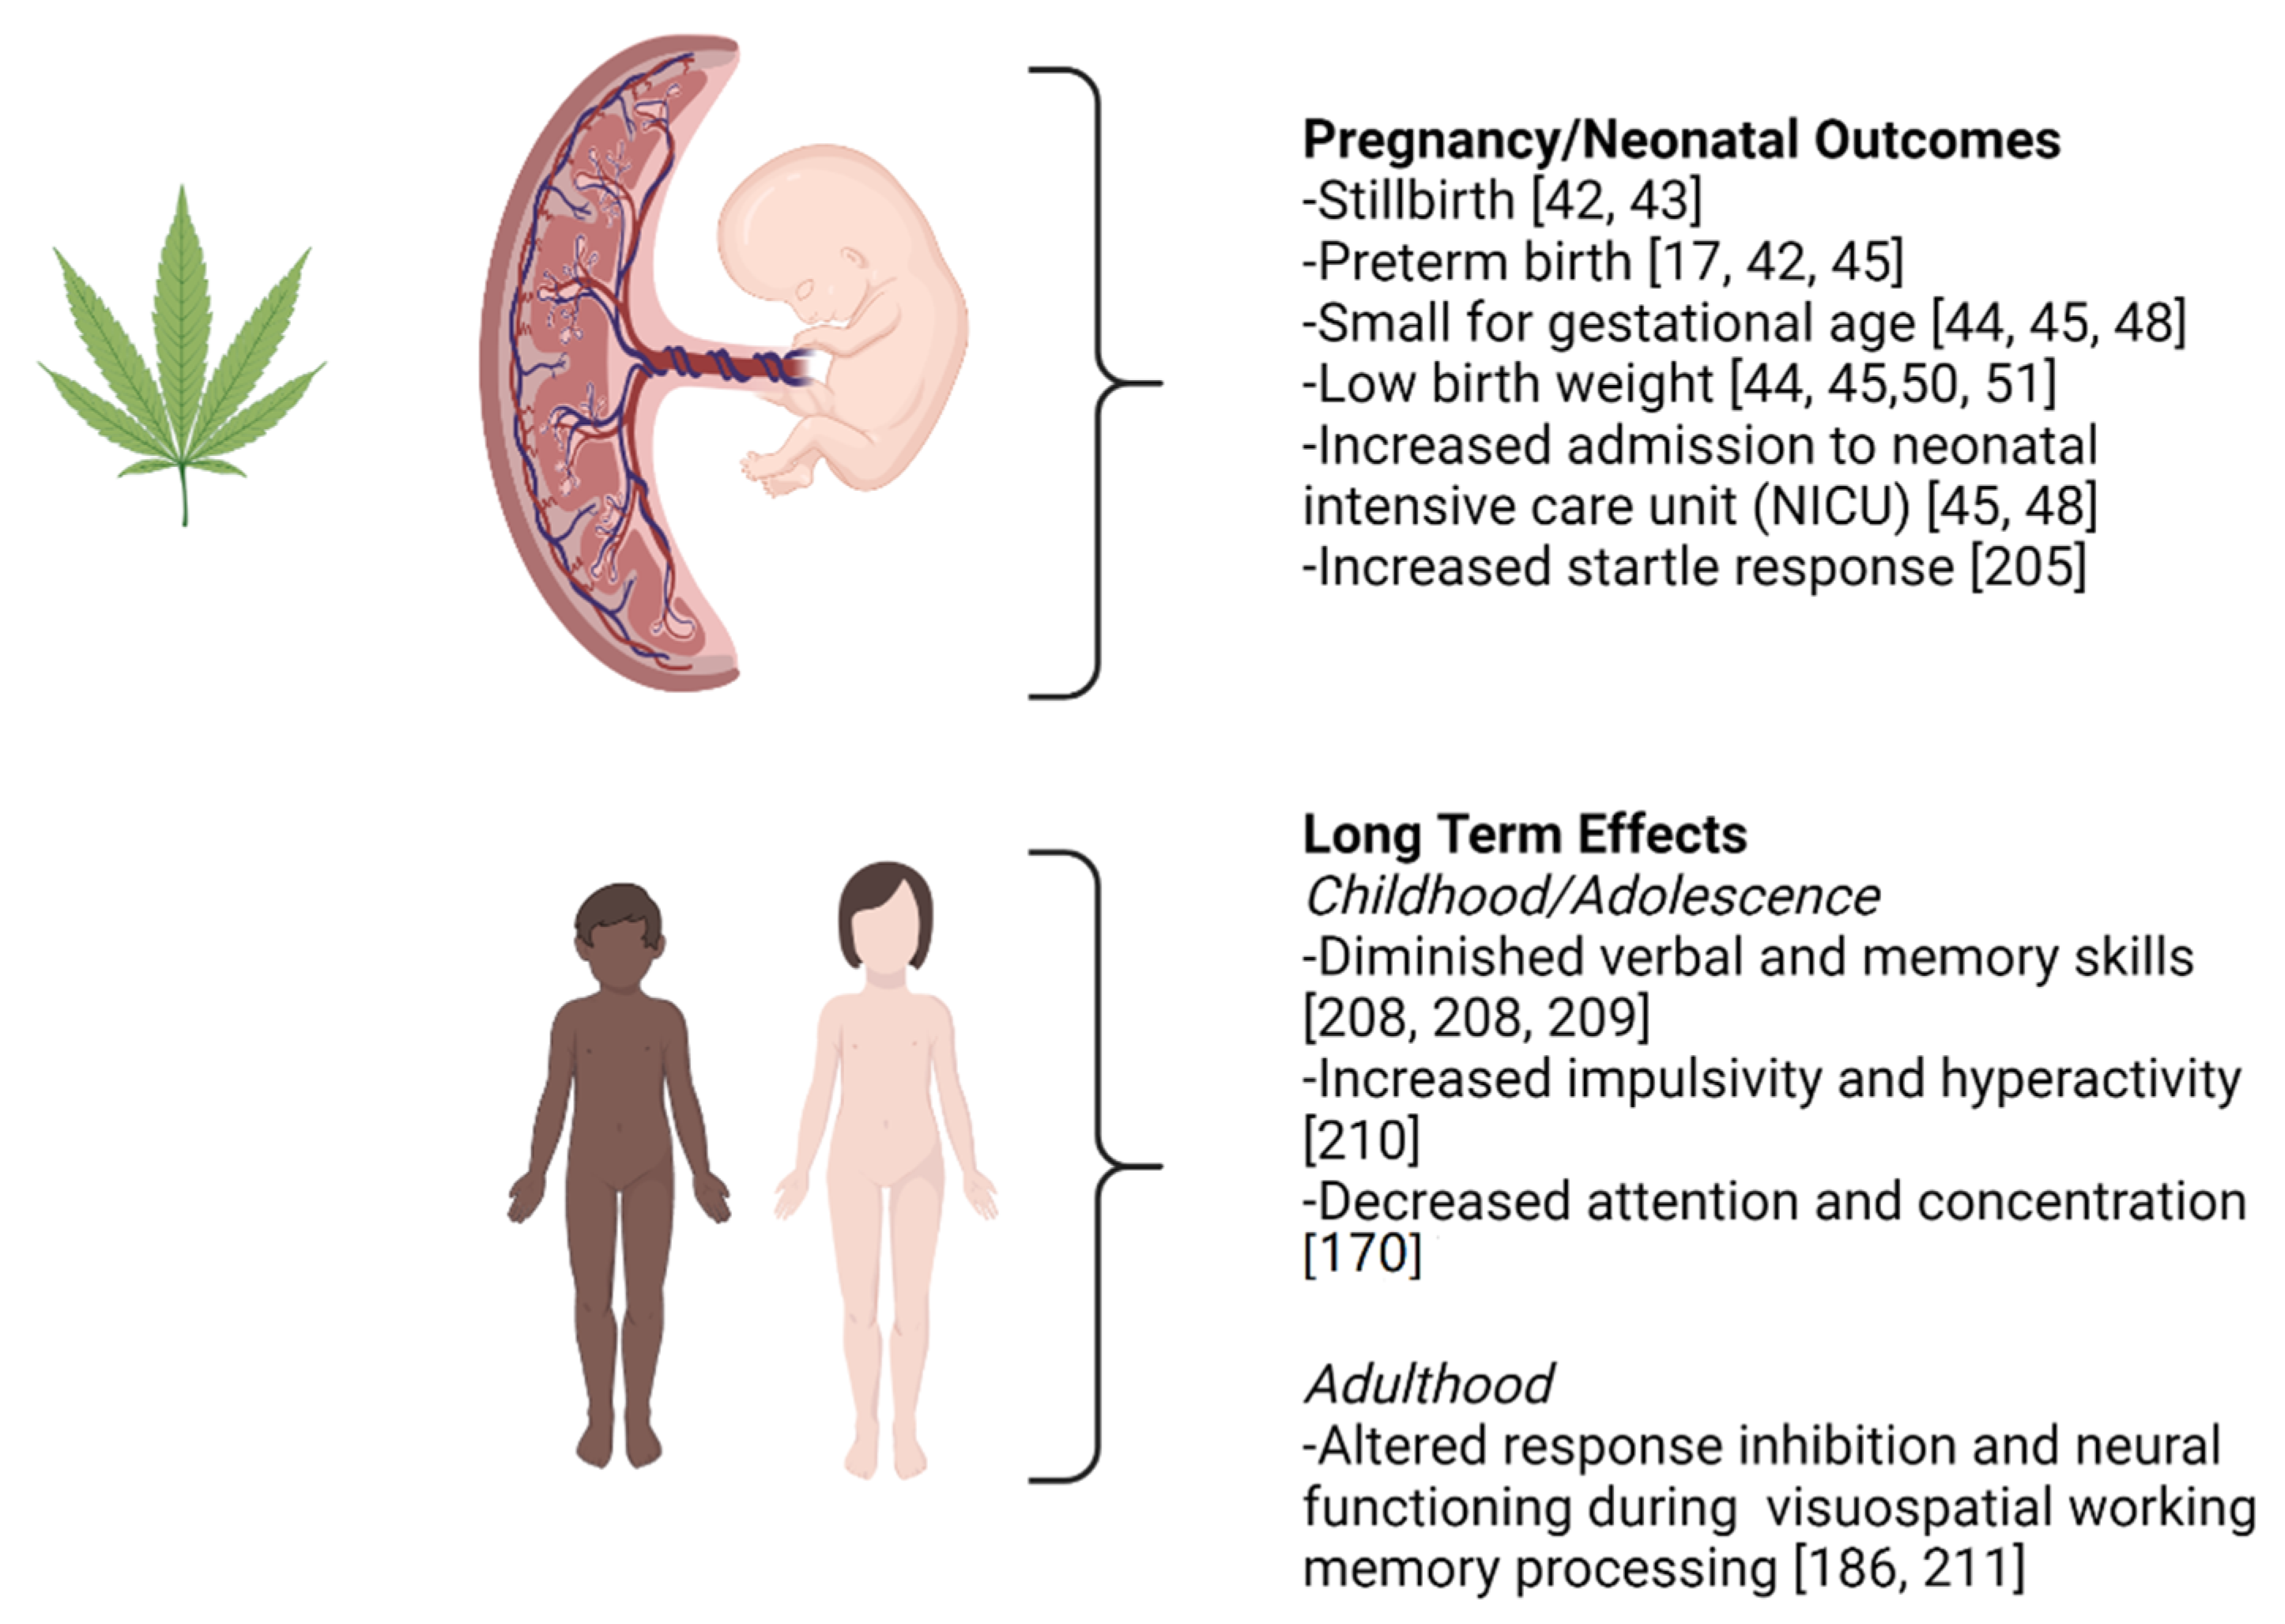 Risks of Cannabis Use During Pregnancy: Findings from a Large